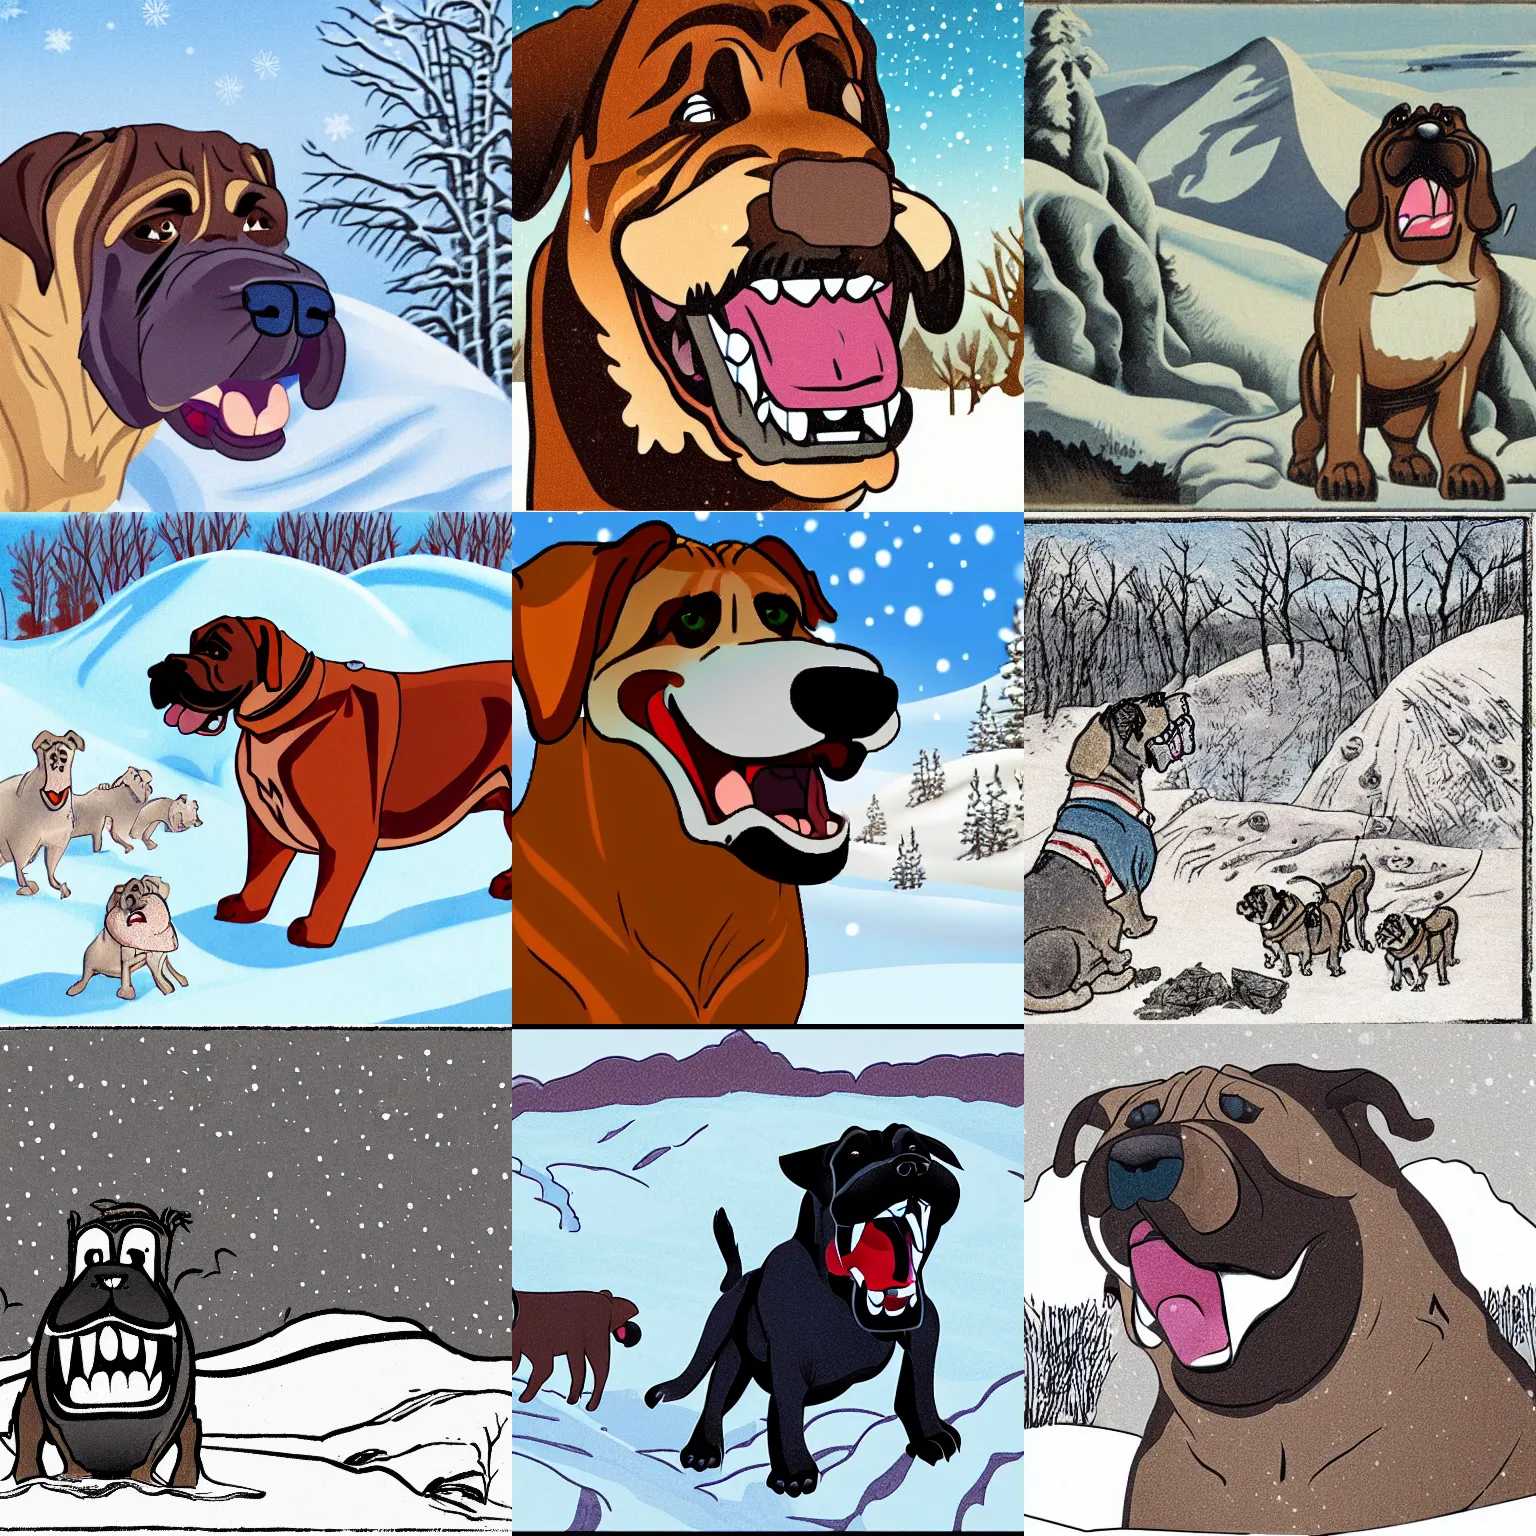 Prompt: cartoon of angry mastiff salivating and showing teeth in winter landscape